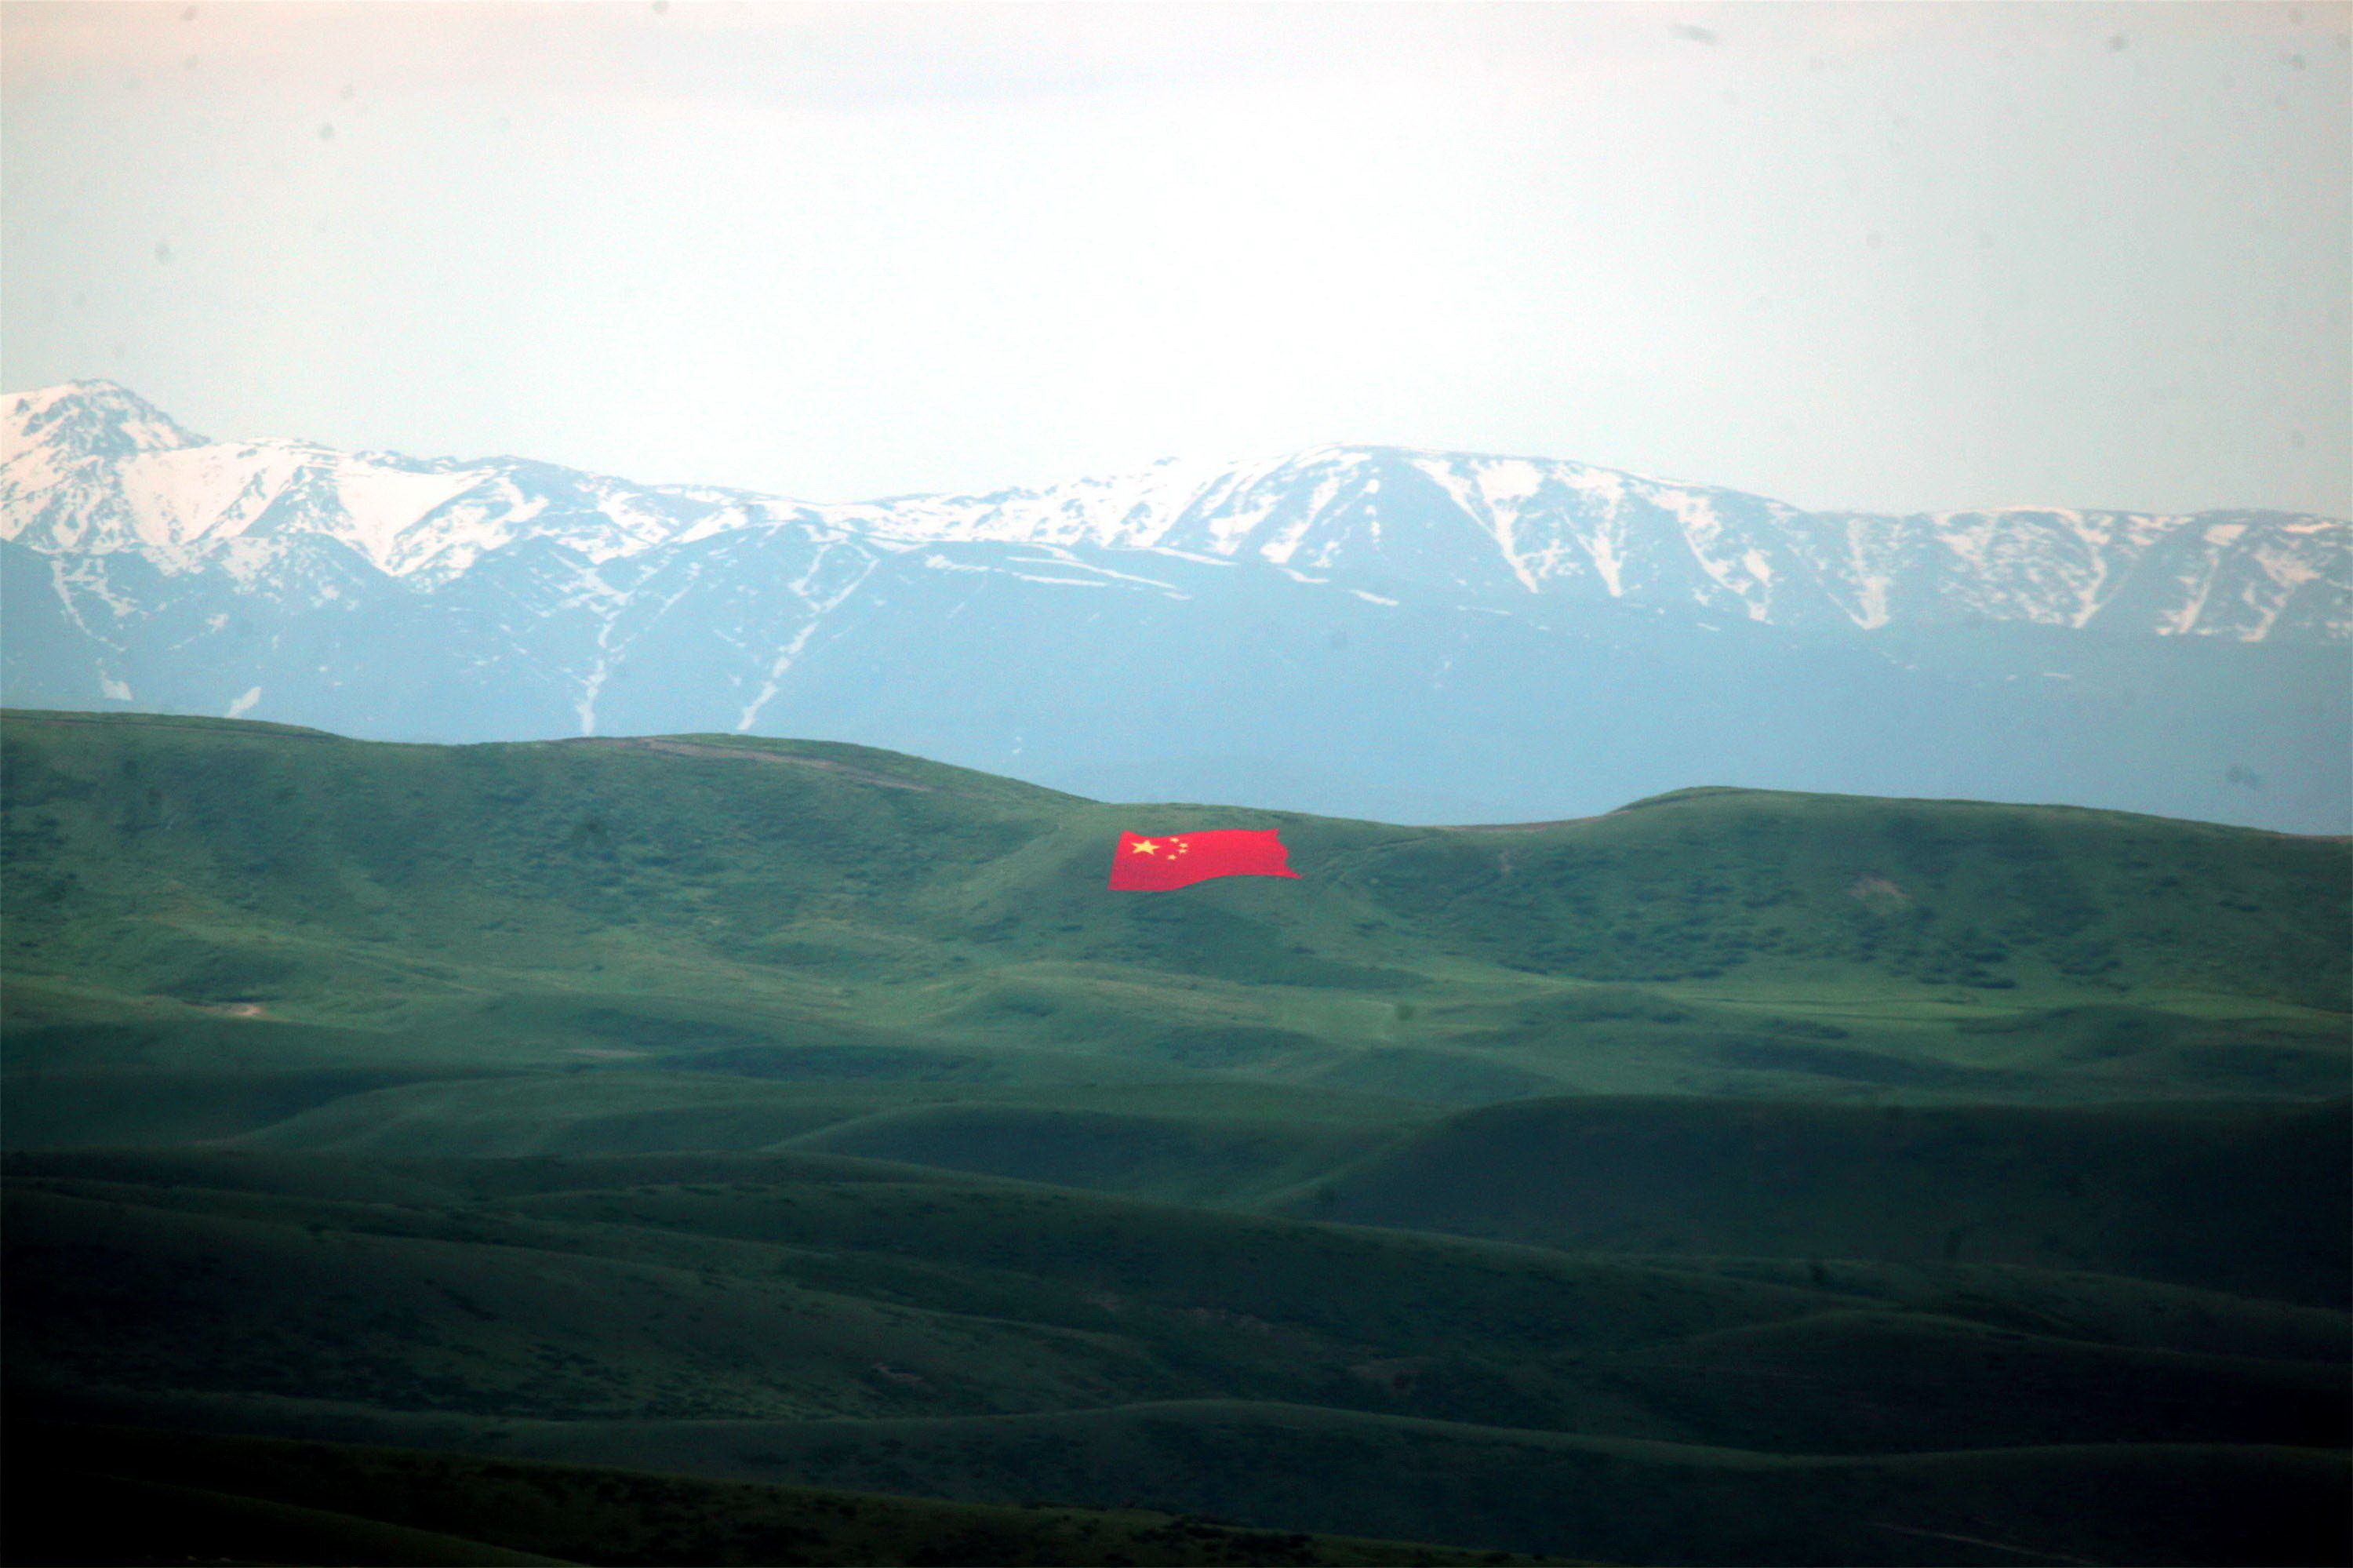 A giant national flag is displayed on the hillside of the peony valley scenic area in the Tacheng region, in northwest China, on May 13, 2019. Image by Costfoto/Barcroft Media via Getty Images. China, 2019.